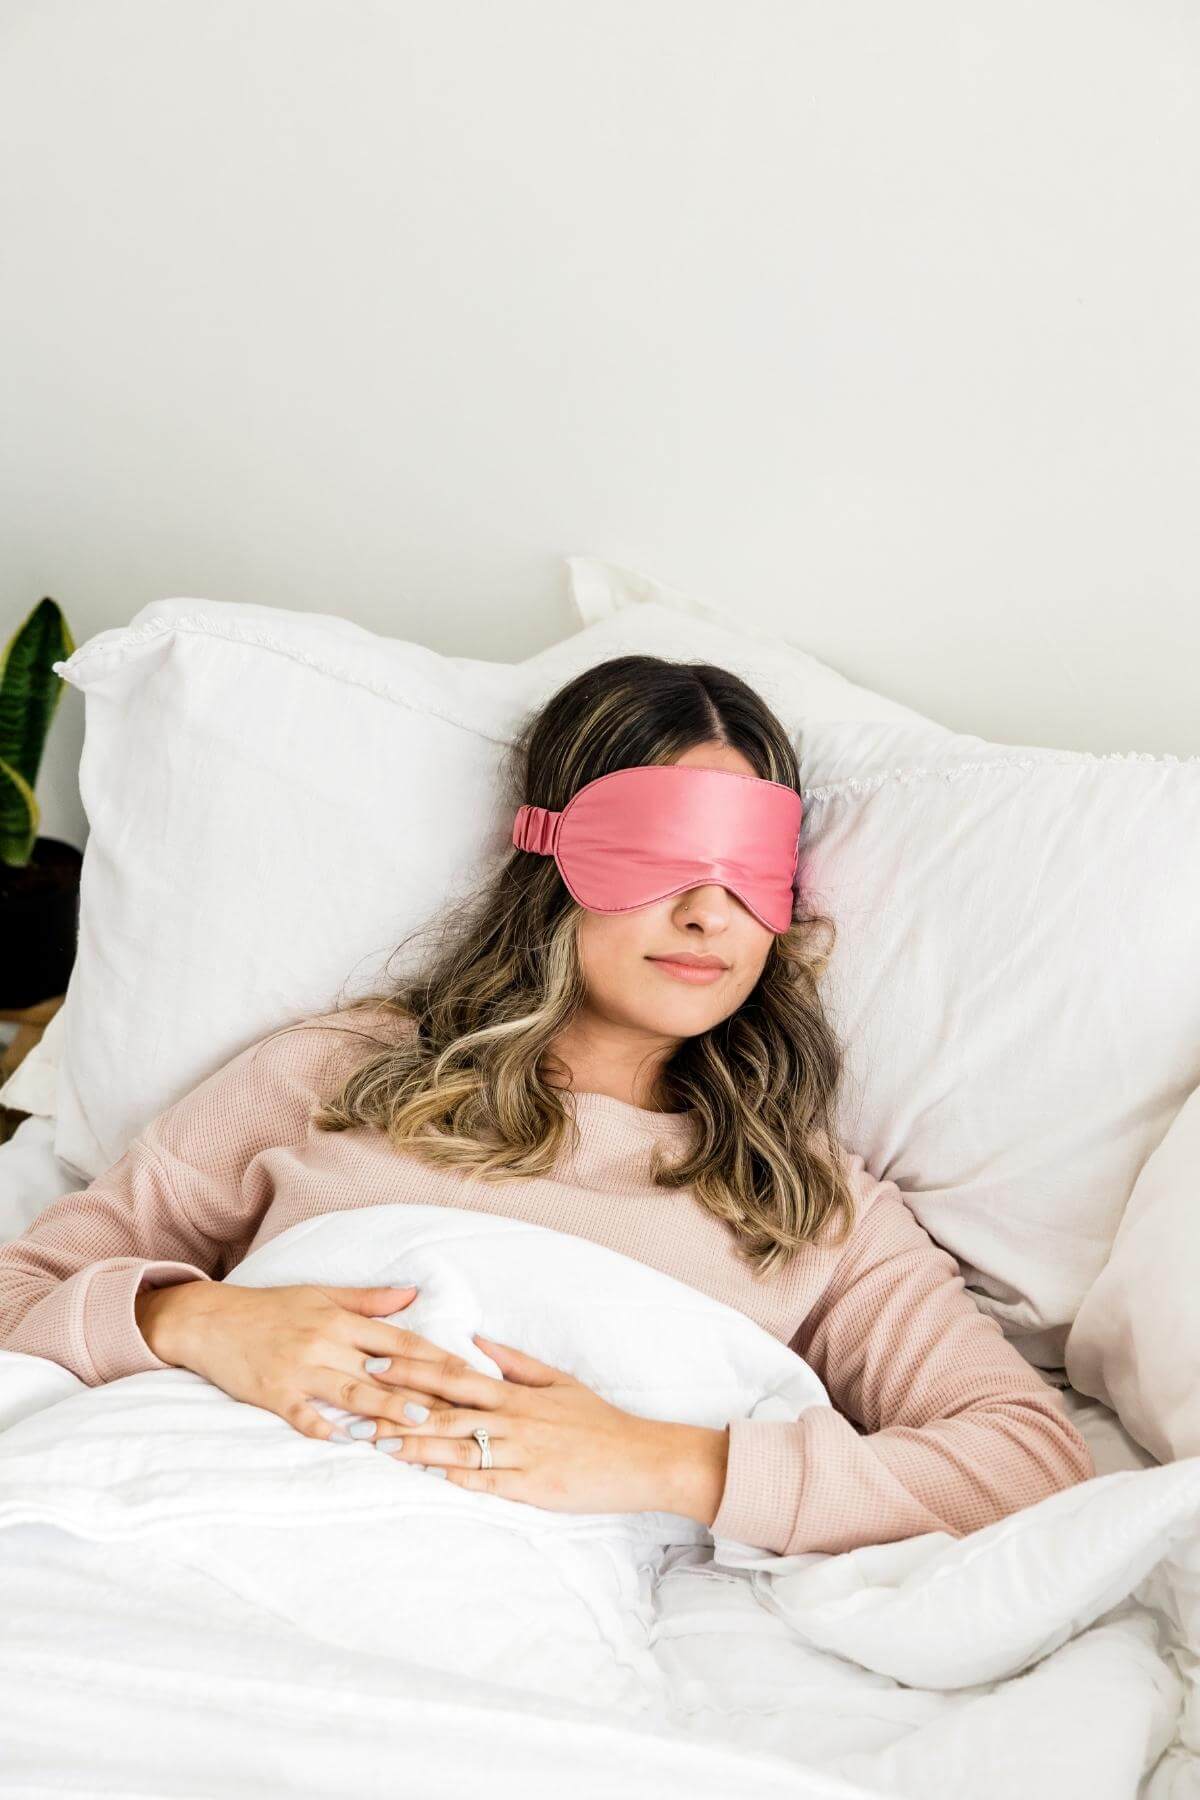 woman sleeping in bed with a pink satin eye mask over her eyes.